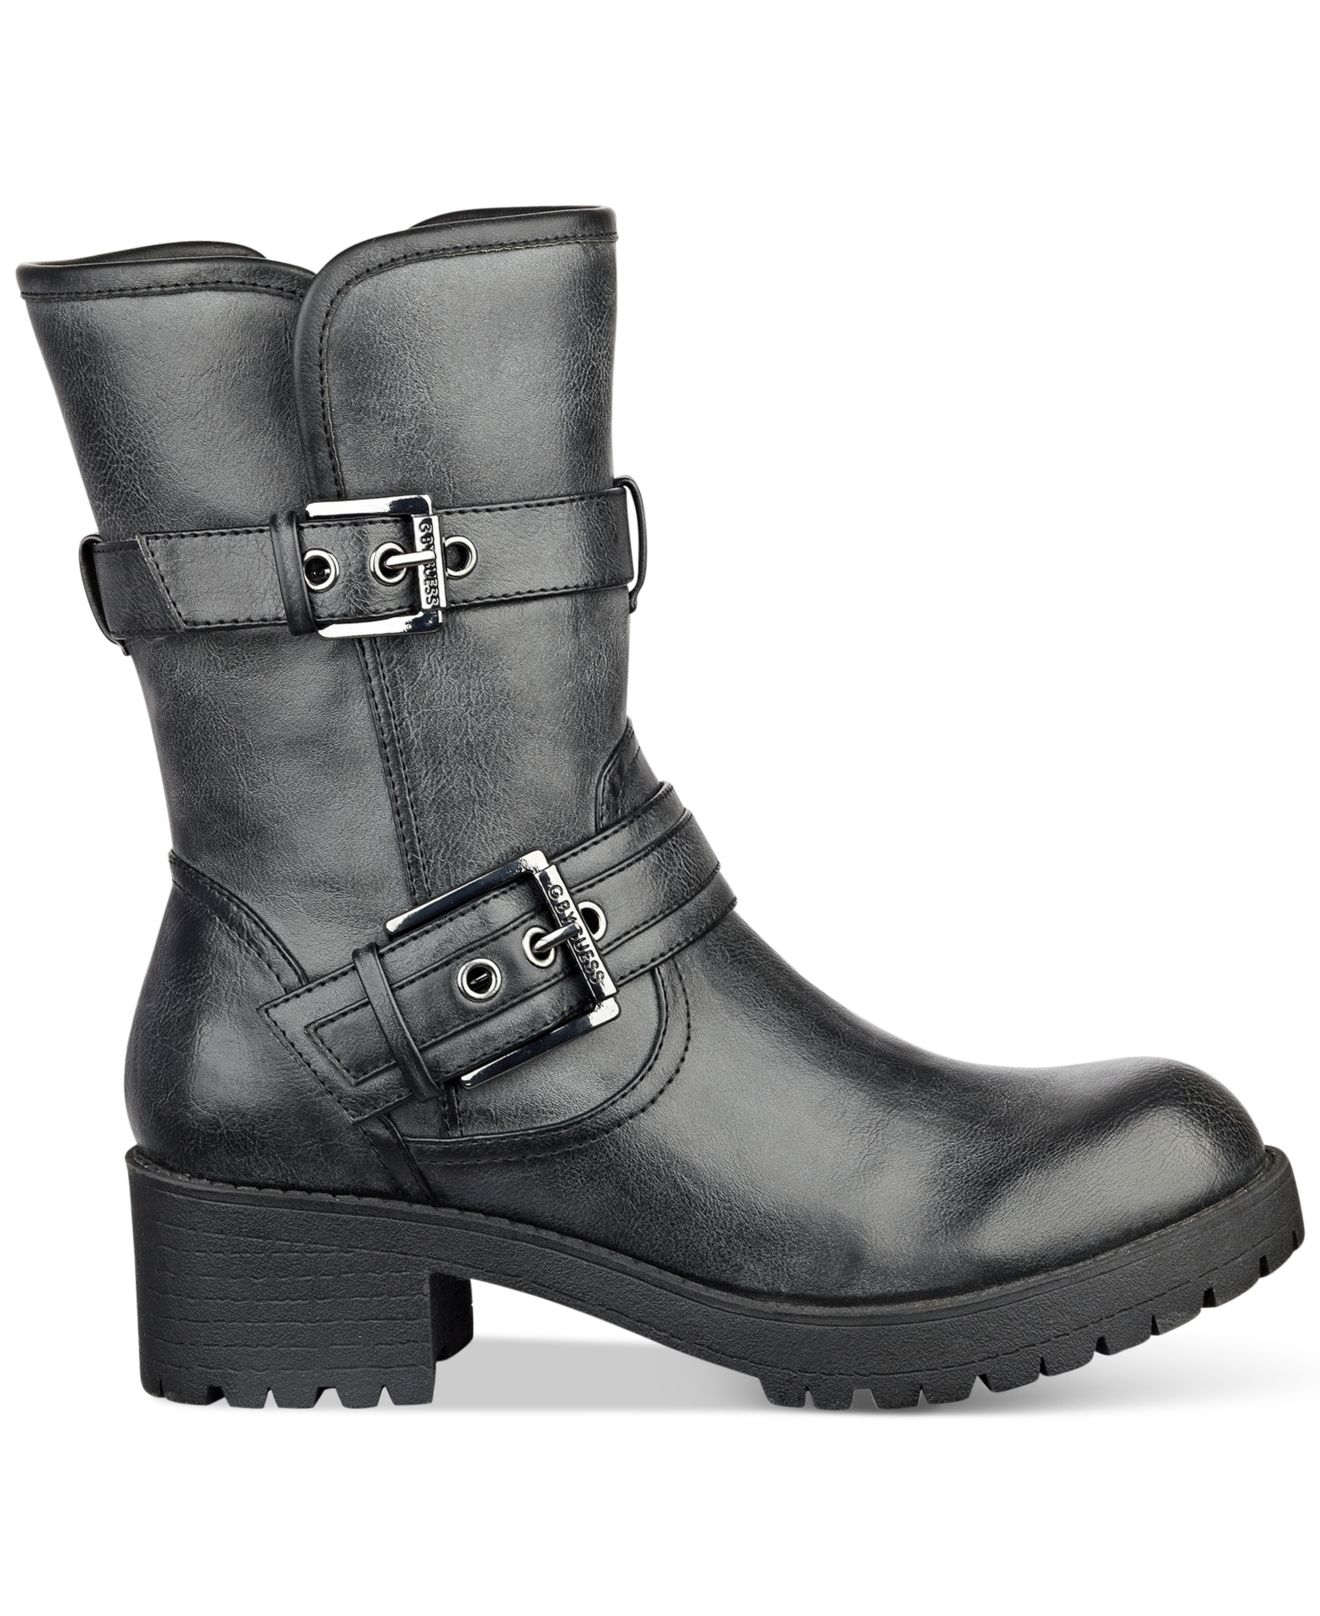 G by Guess Minion Moto Booties in Black 